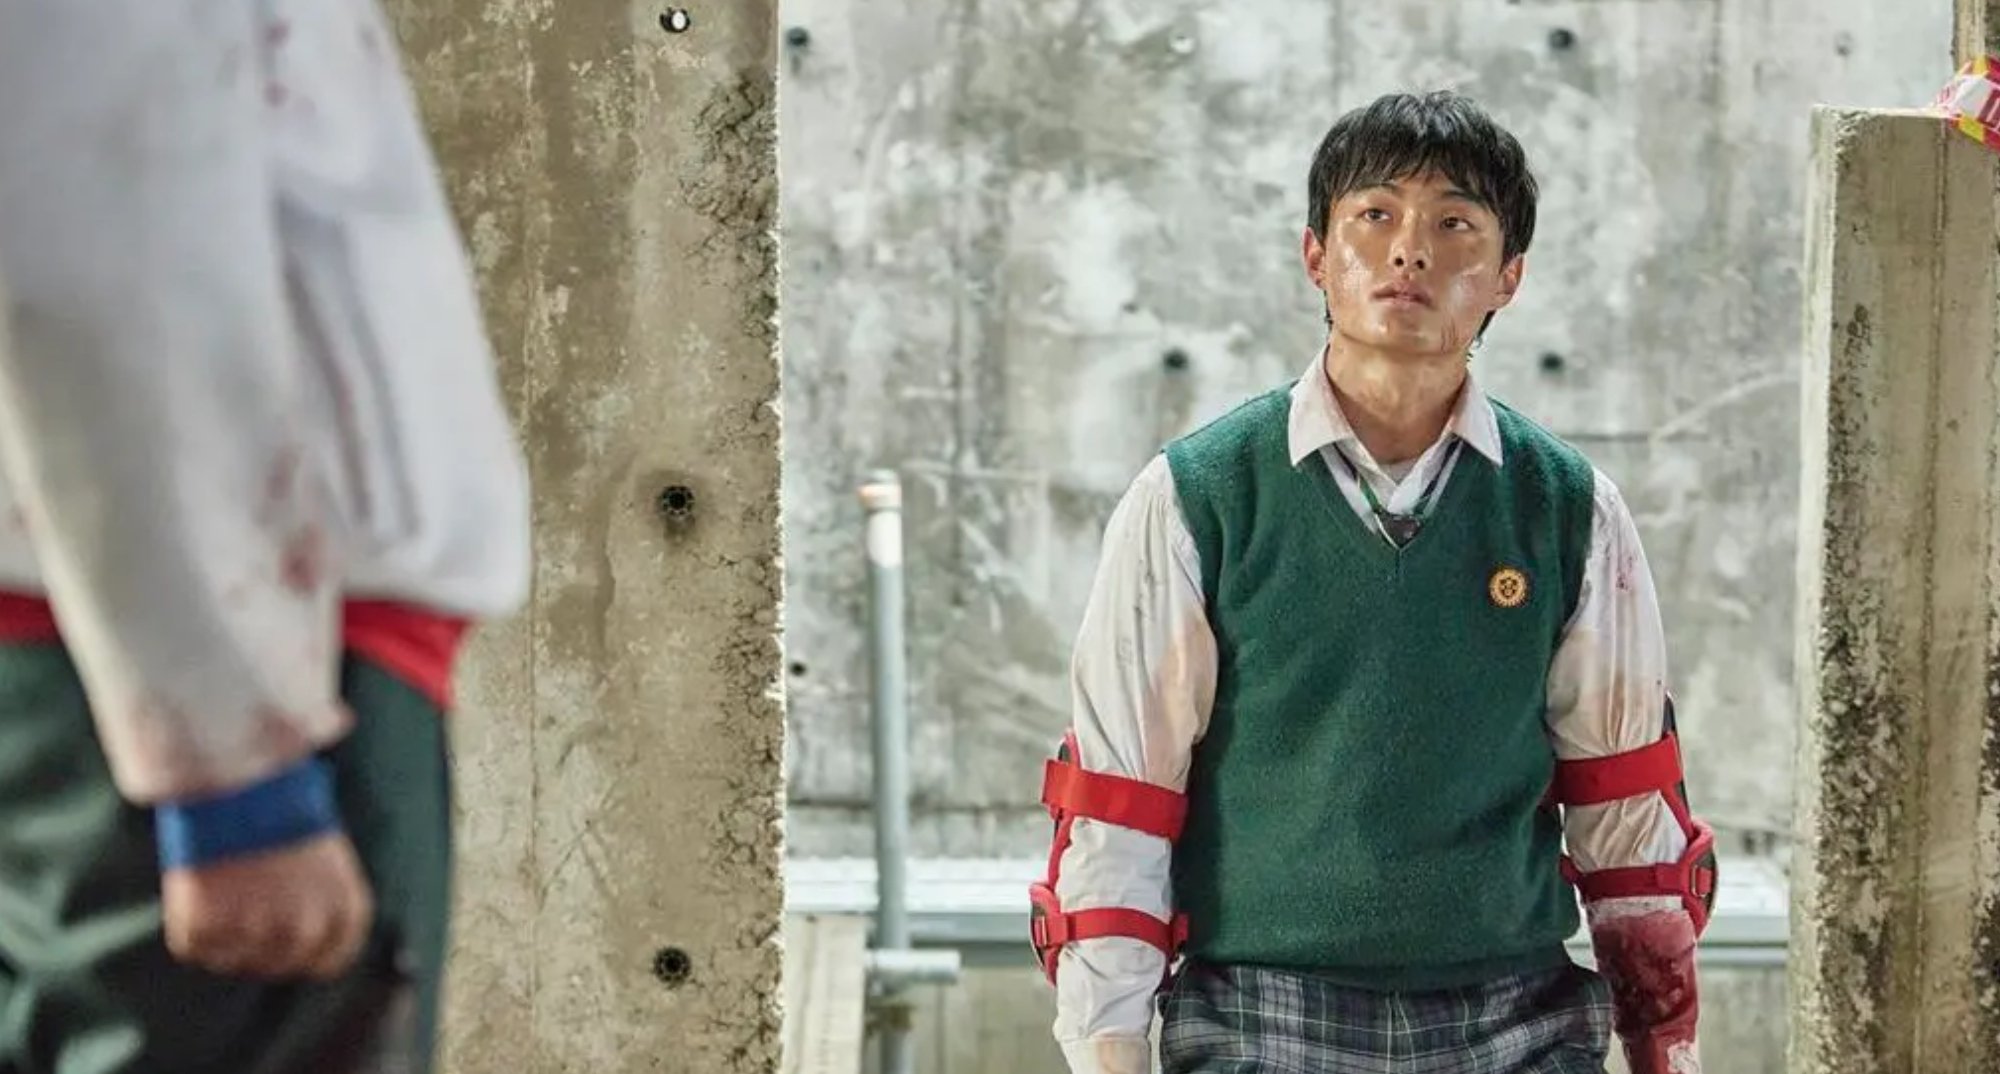 Yoon Chan-young as Cheong-san in 'All of Us Are Dead' in relation to Season 2 wearing school uniform.